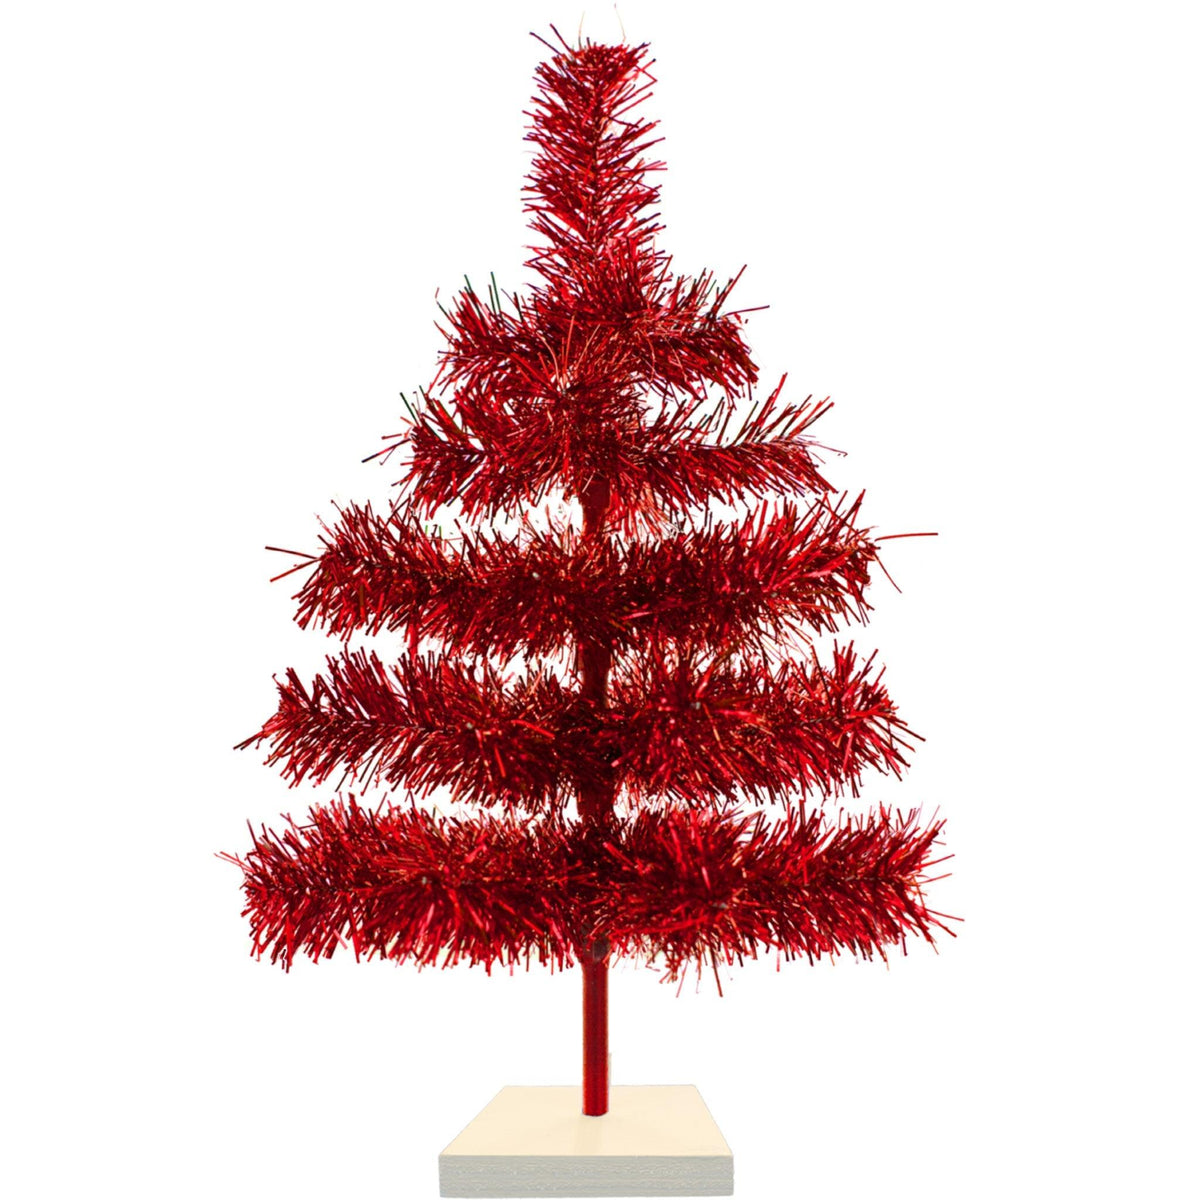 Small 18in tall Red Tinsel Christmas Trees on sale at leedisplay.com